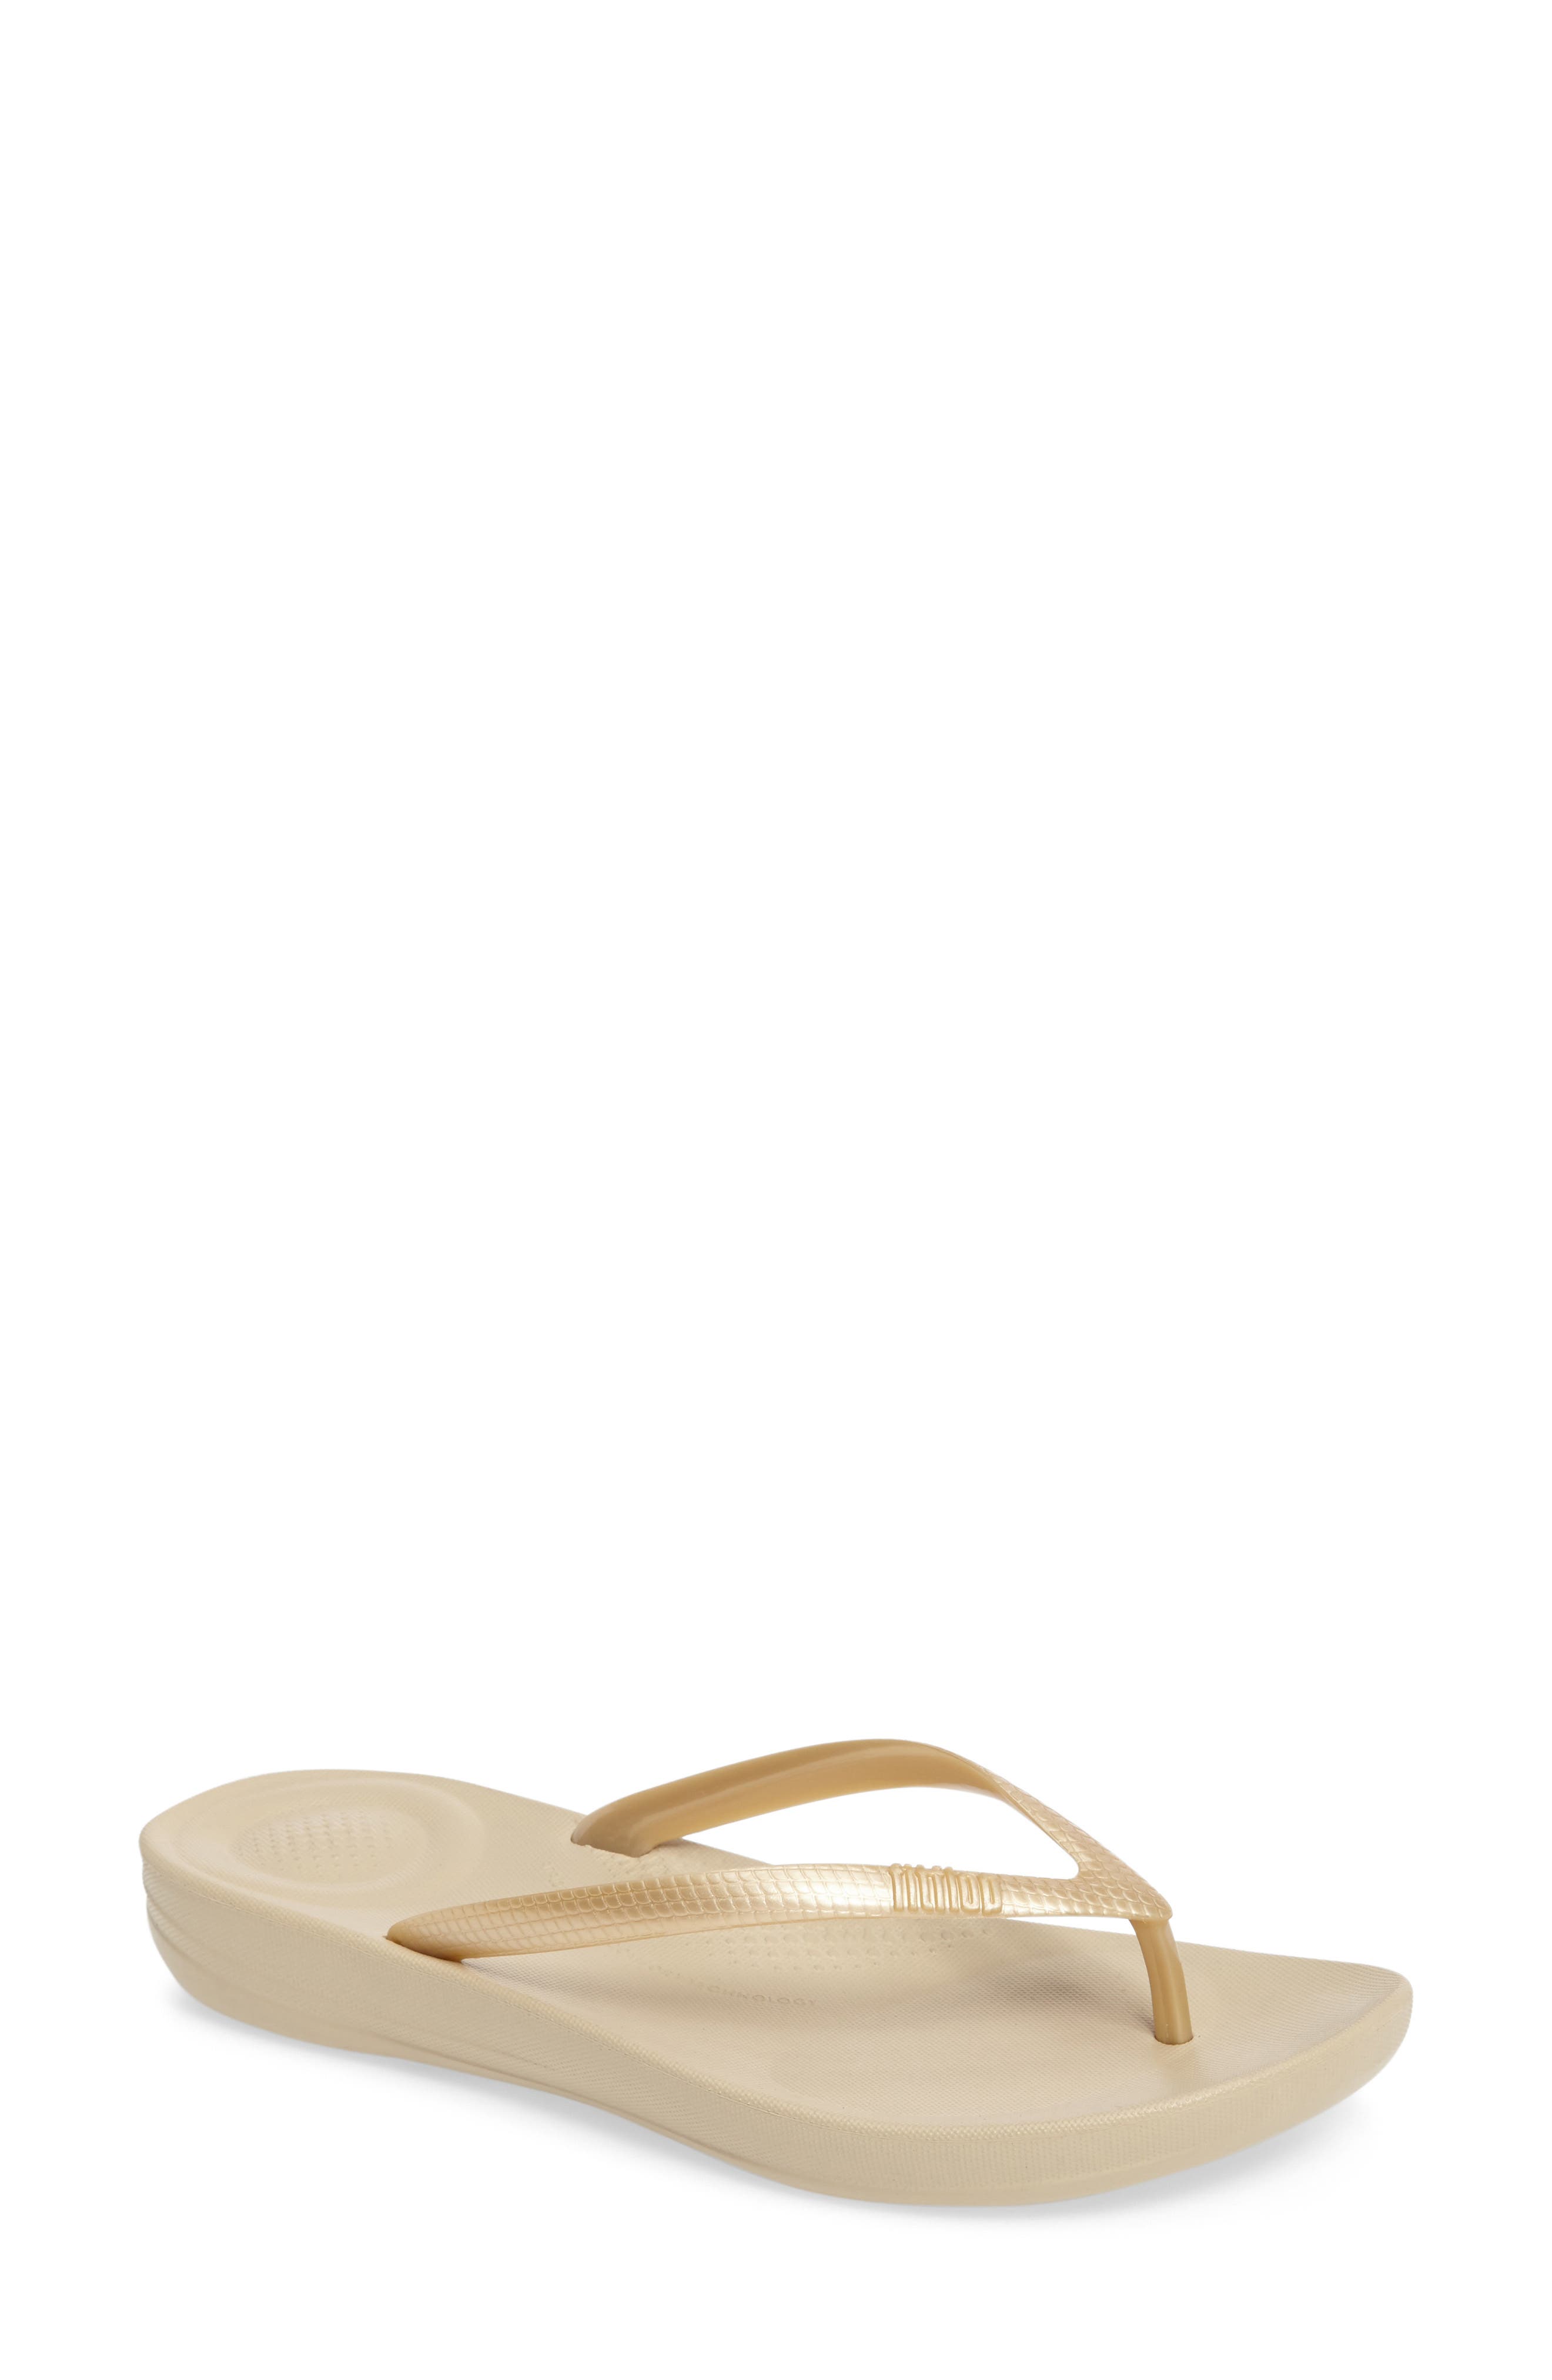 Women's Fitflop Shoes | Nordstrom